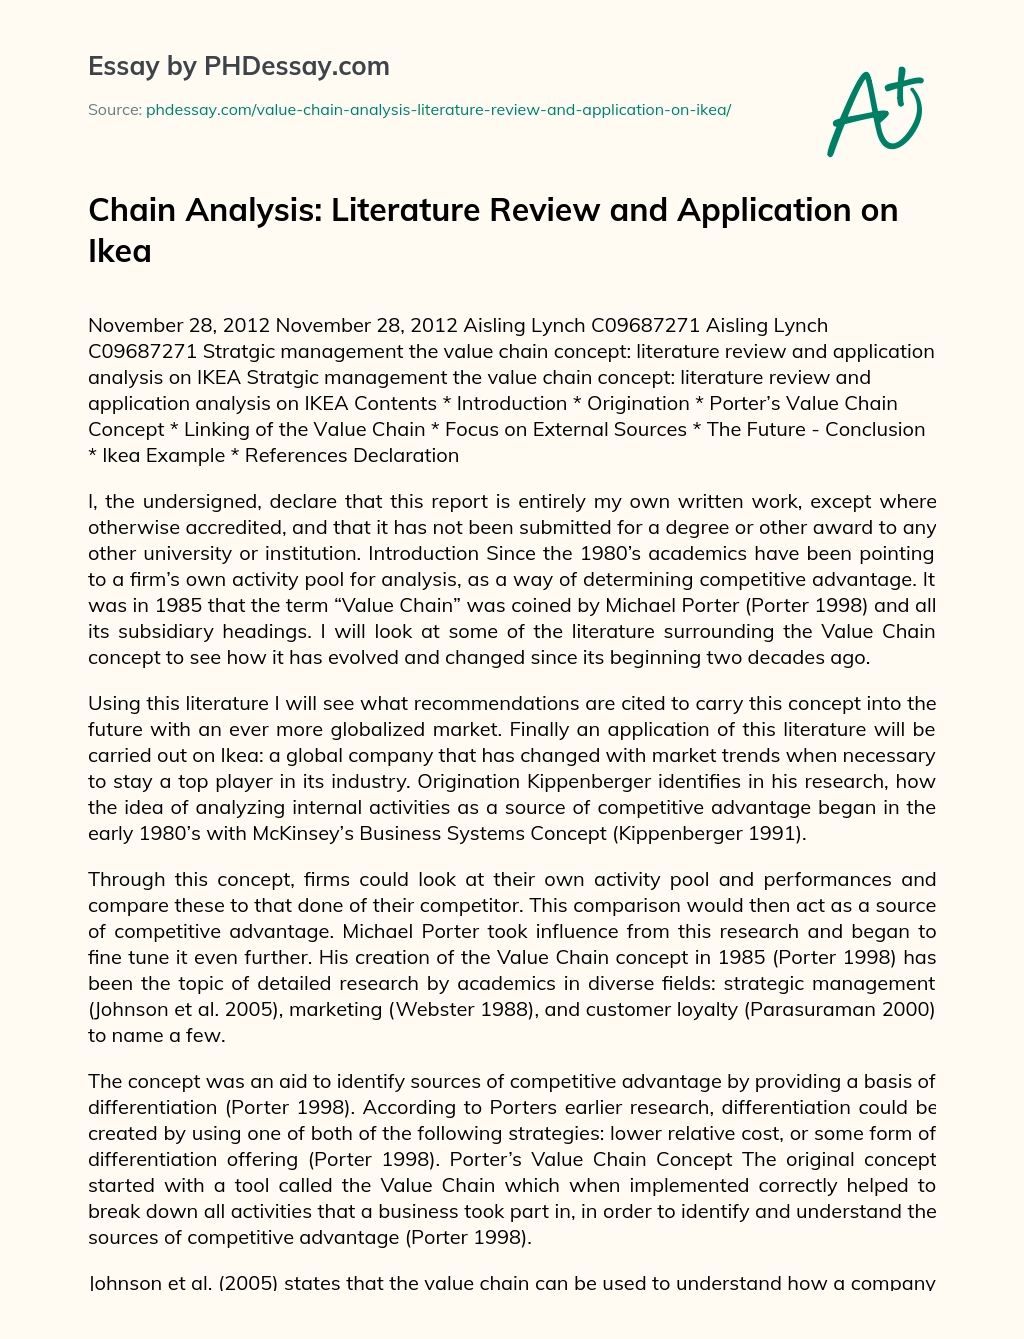 Chain Analysis: Literature Review and Application on Ikea essay